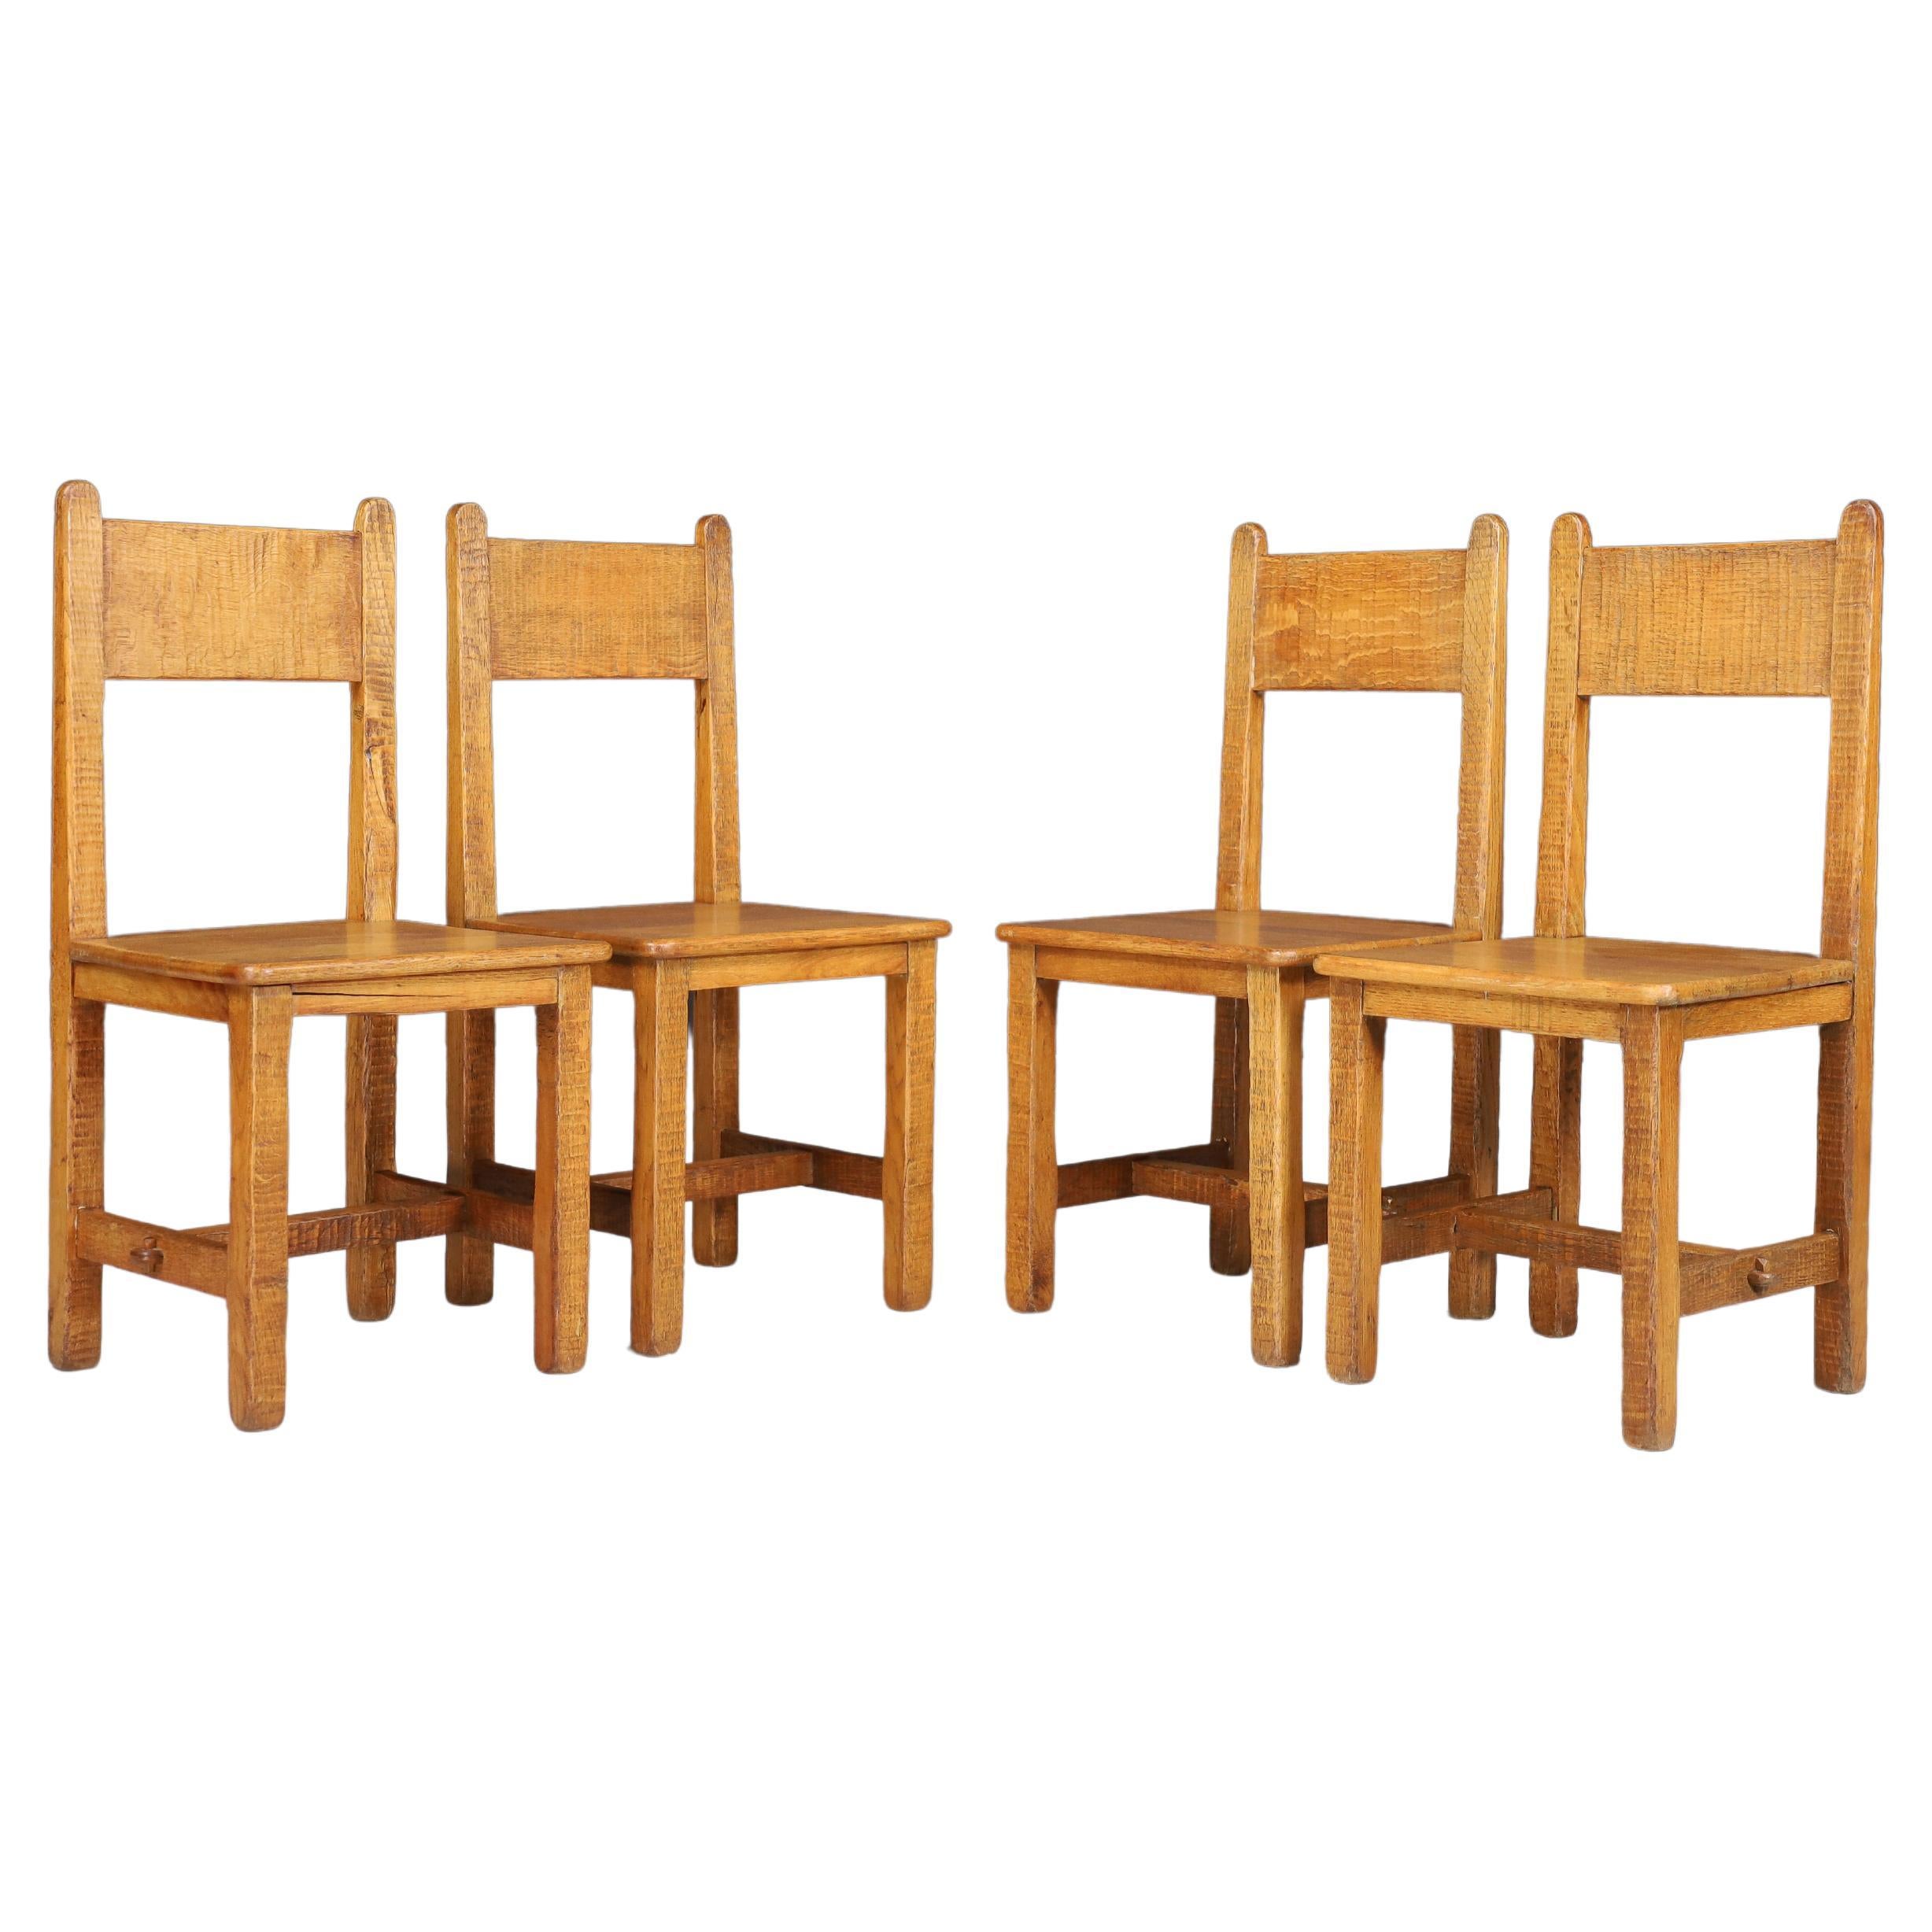 Set of Four Primitive Chairs in Patinated Oak, France, 1950s